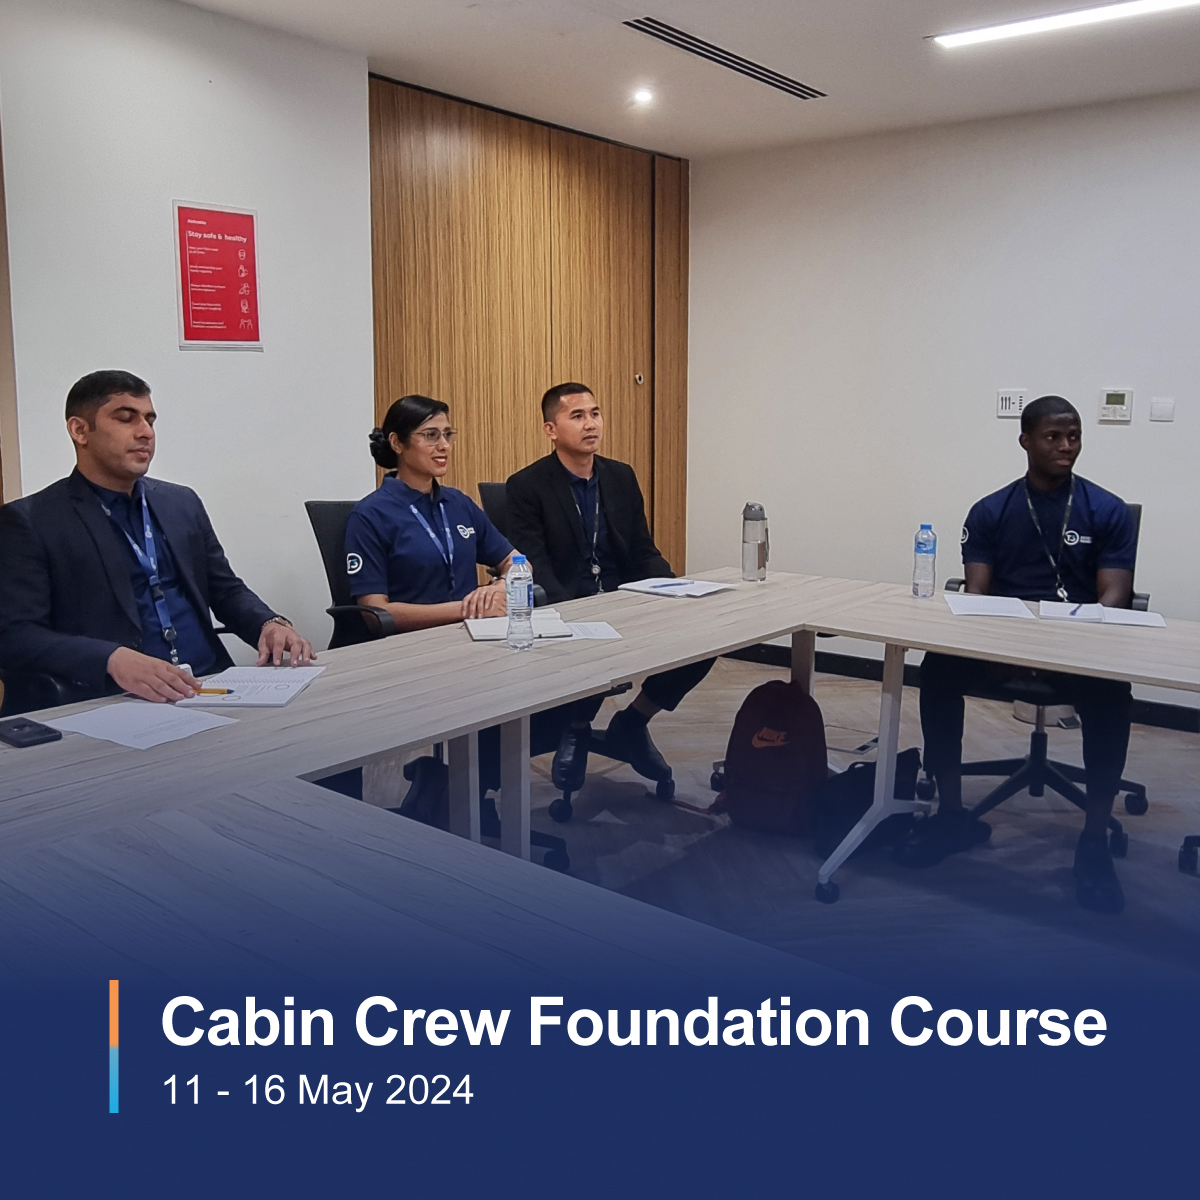 The Cabin Crew Foundation Course is your launchpad to a rewarding career in the skies. Enhance your communication skills, be prepared, and groomed to master the cabin crew airline selection programme. ​

Contact +971 50 6282174​

#t3aviationacademy #cabincrew #flightattendant